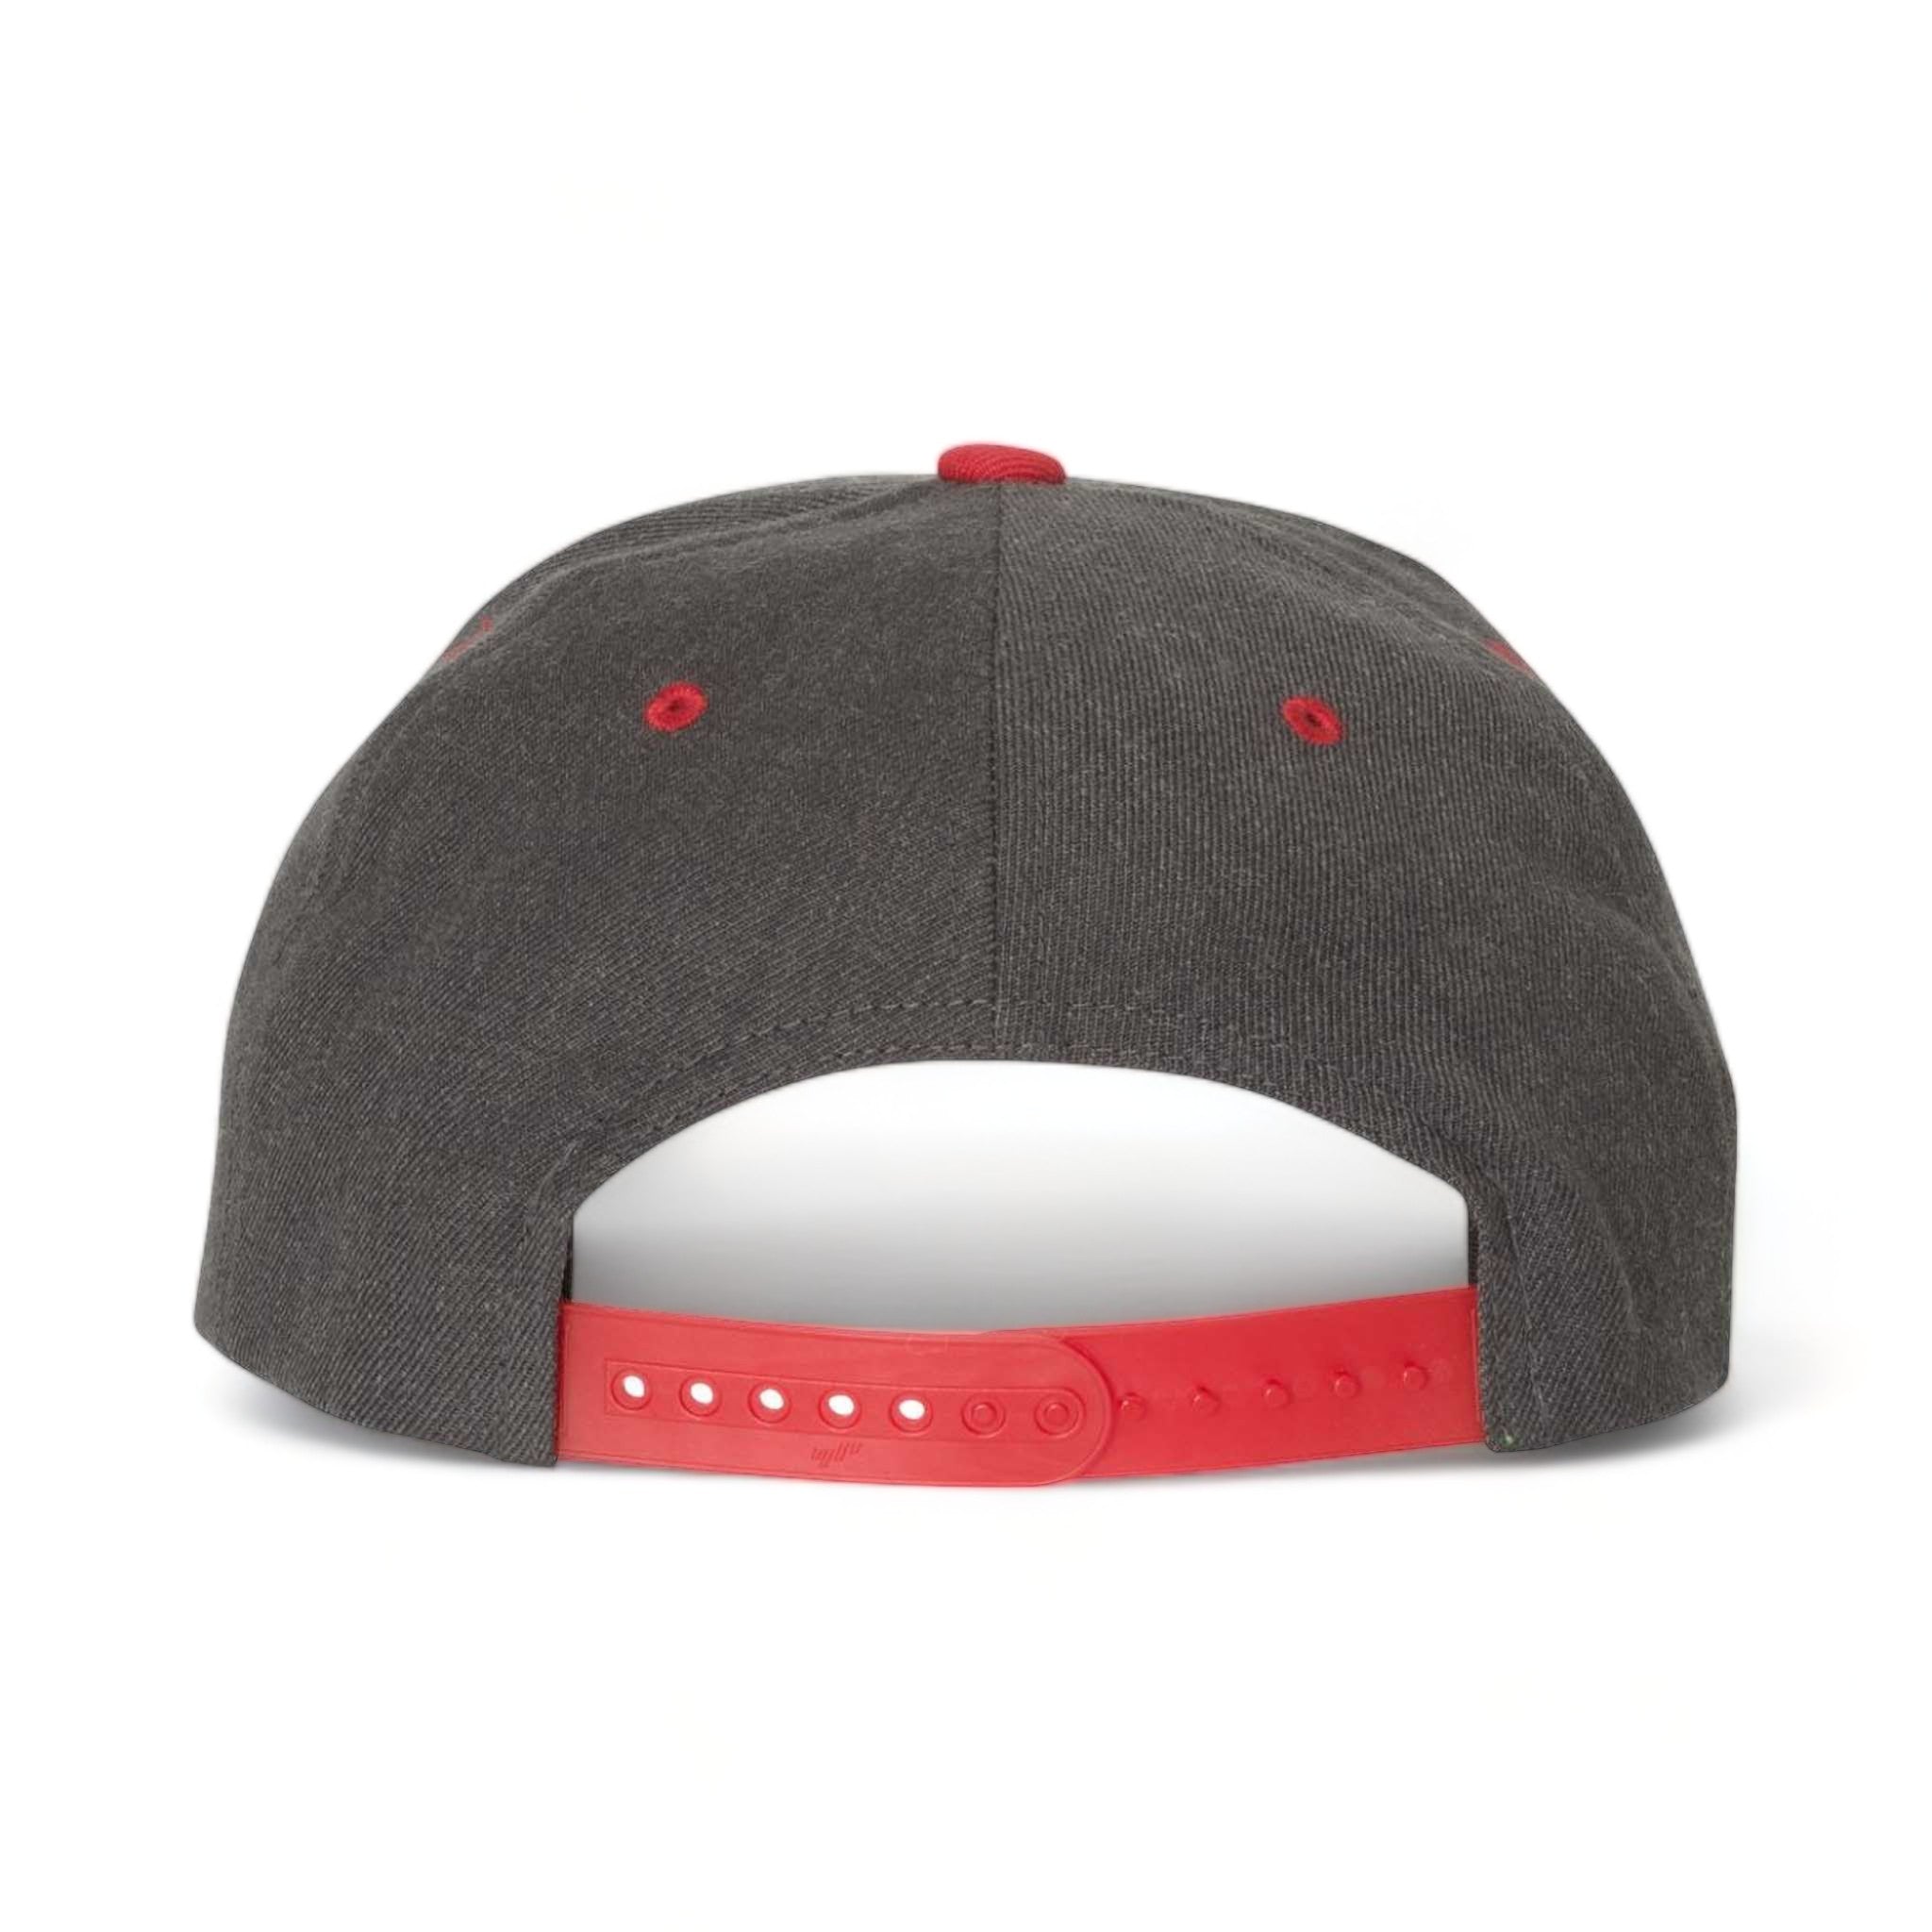 Back view of YP Classics 6089M custom hat in dark heather and red